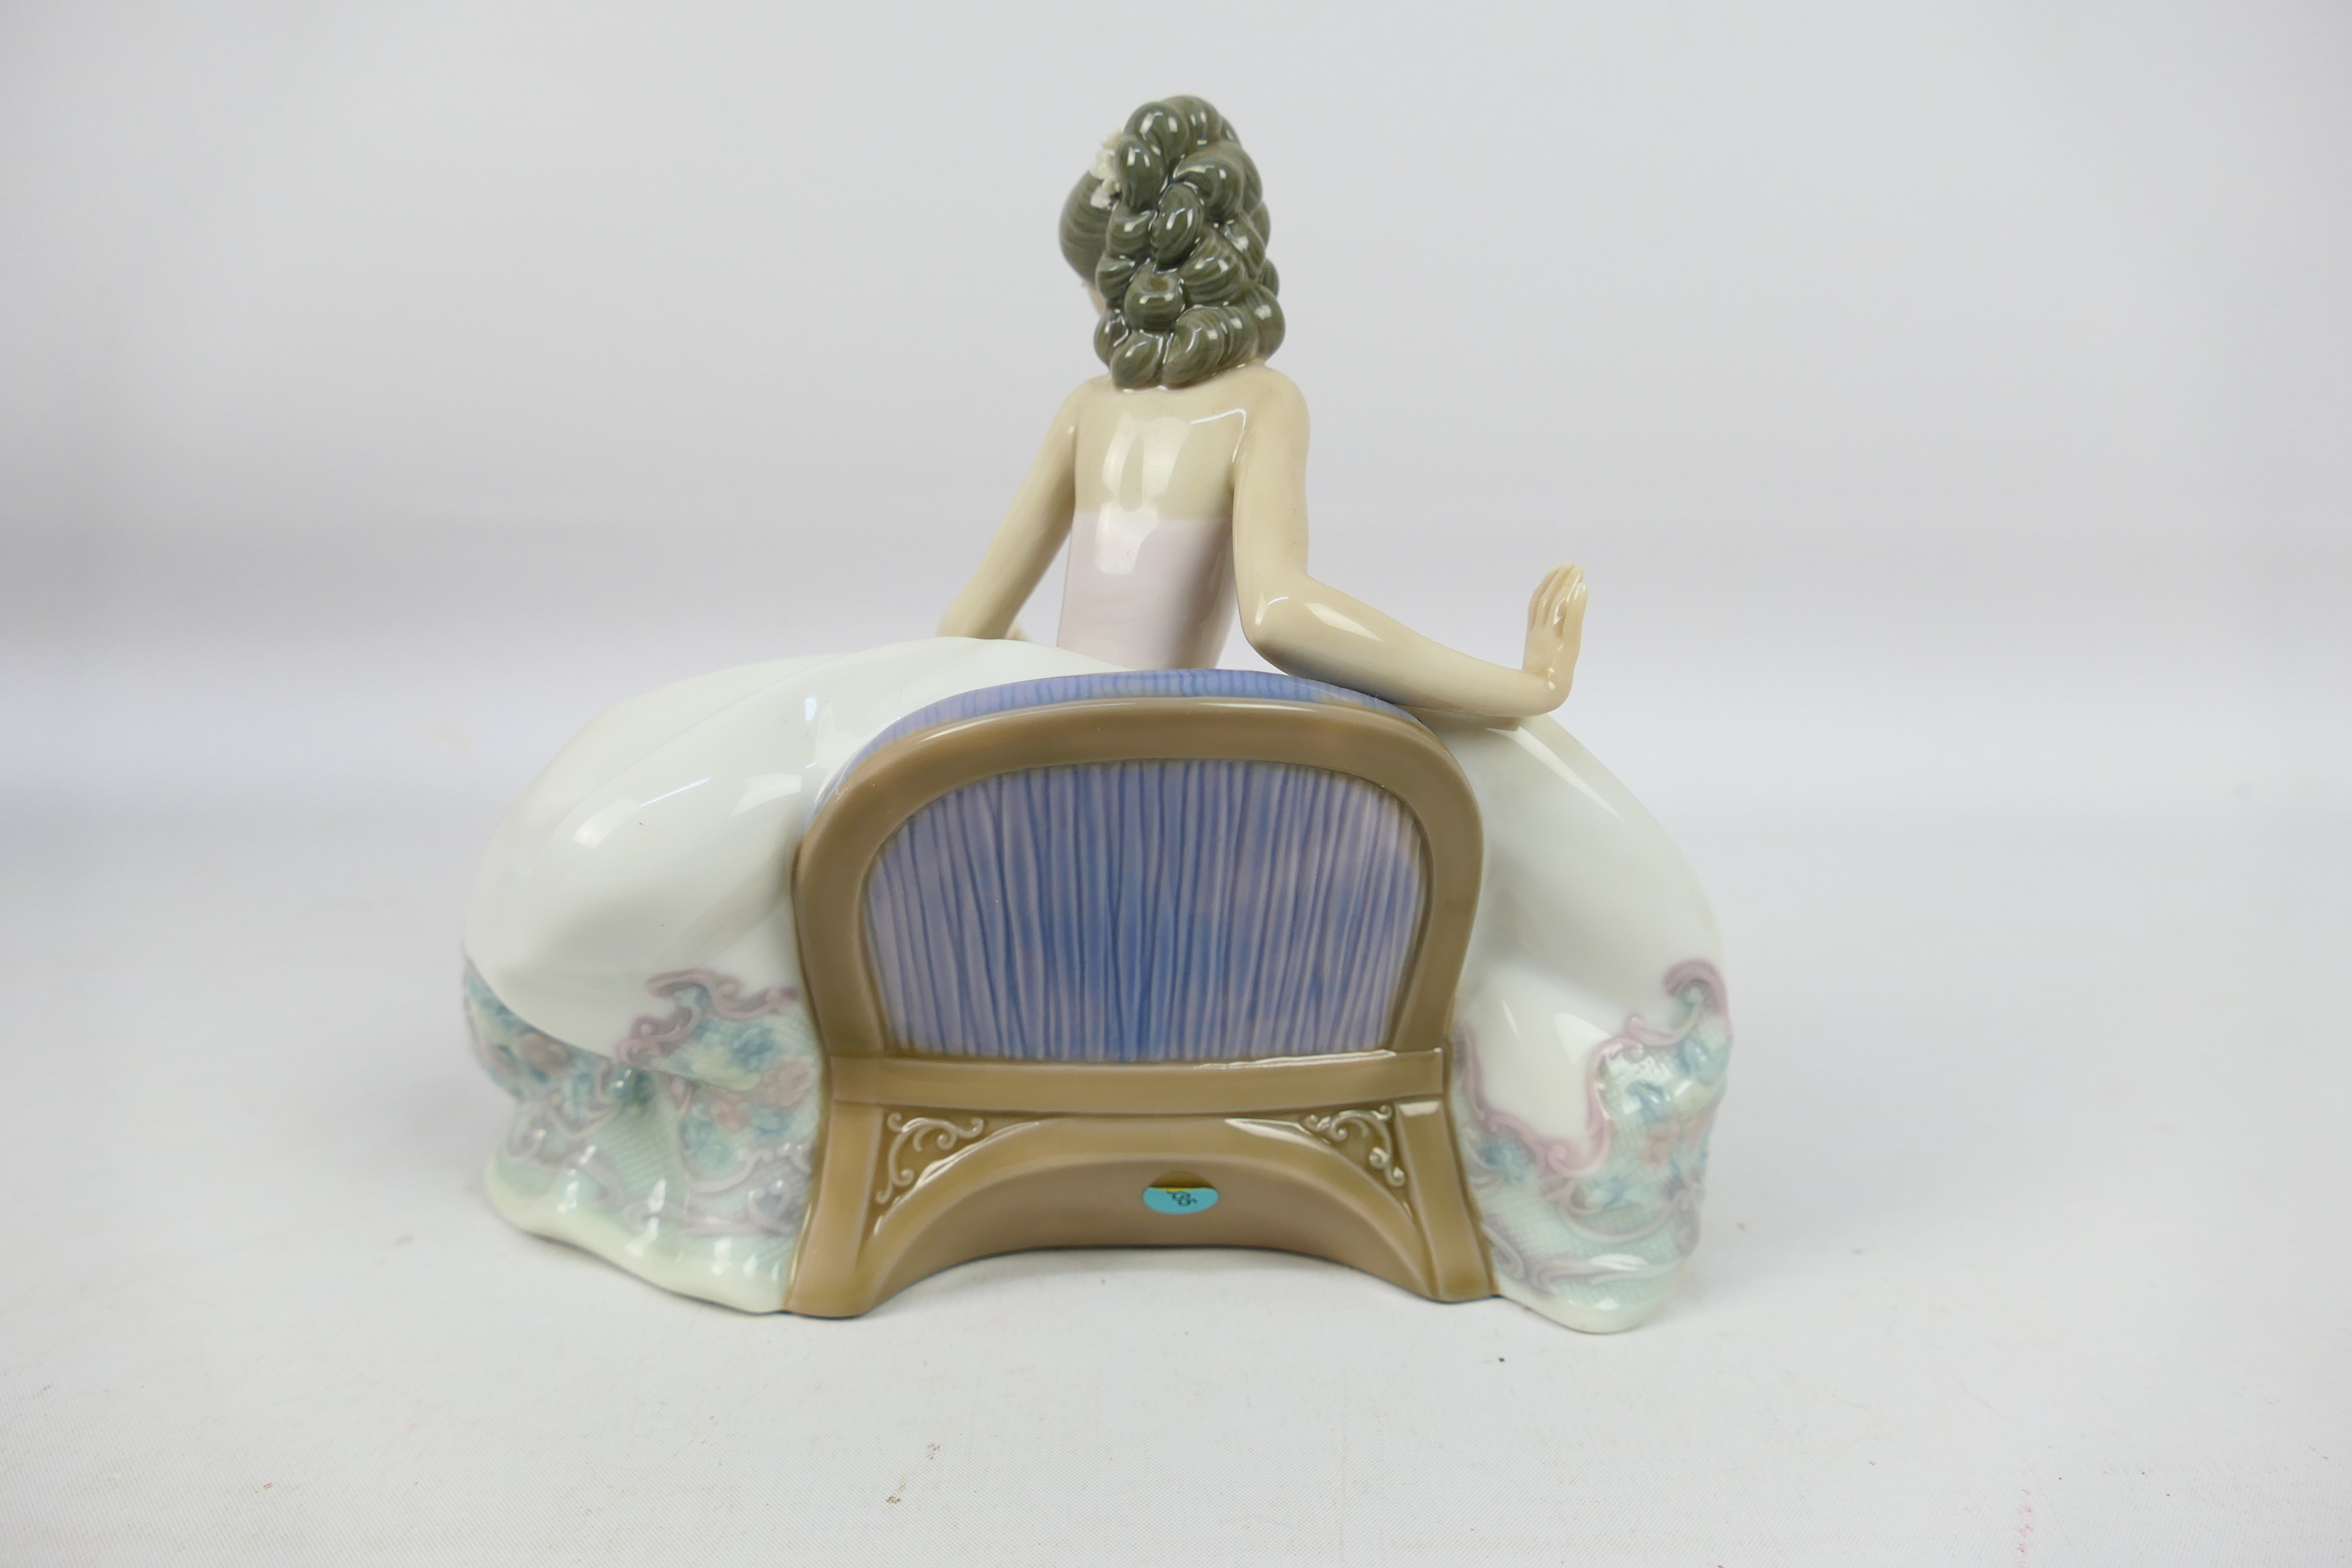 Lladro - A boxed figure entitled At The Ball, # 5859, approximately 15 cm (h). - Image 4 of 7